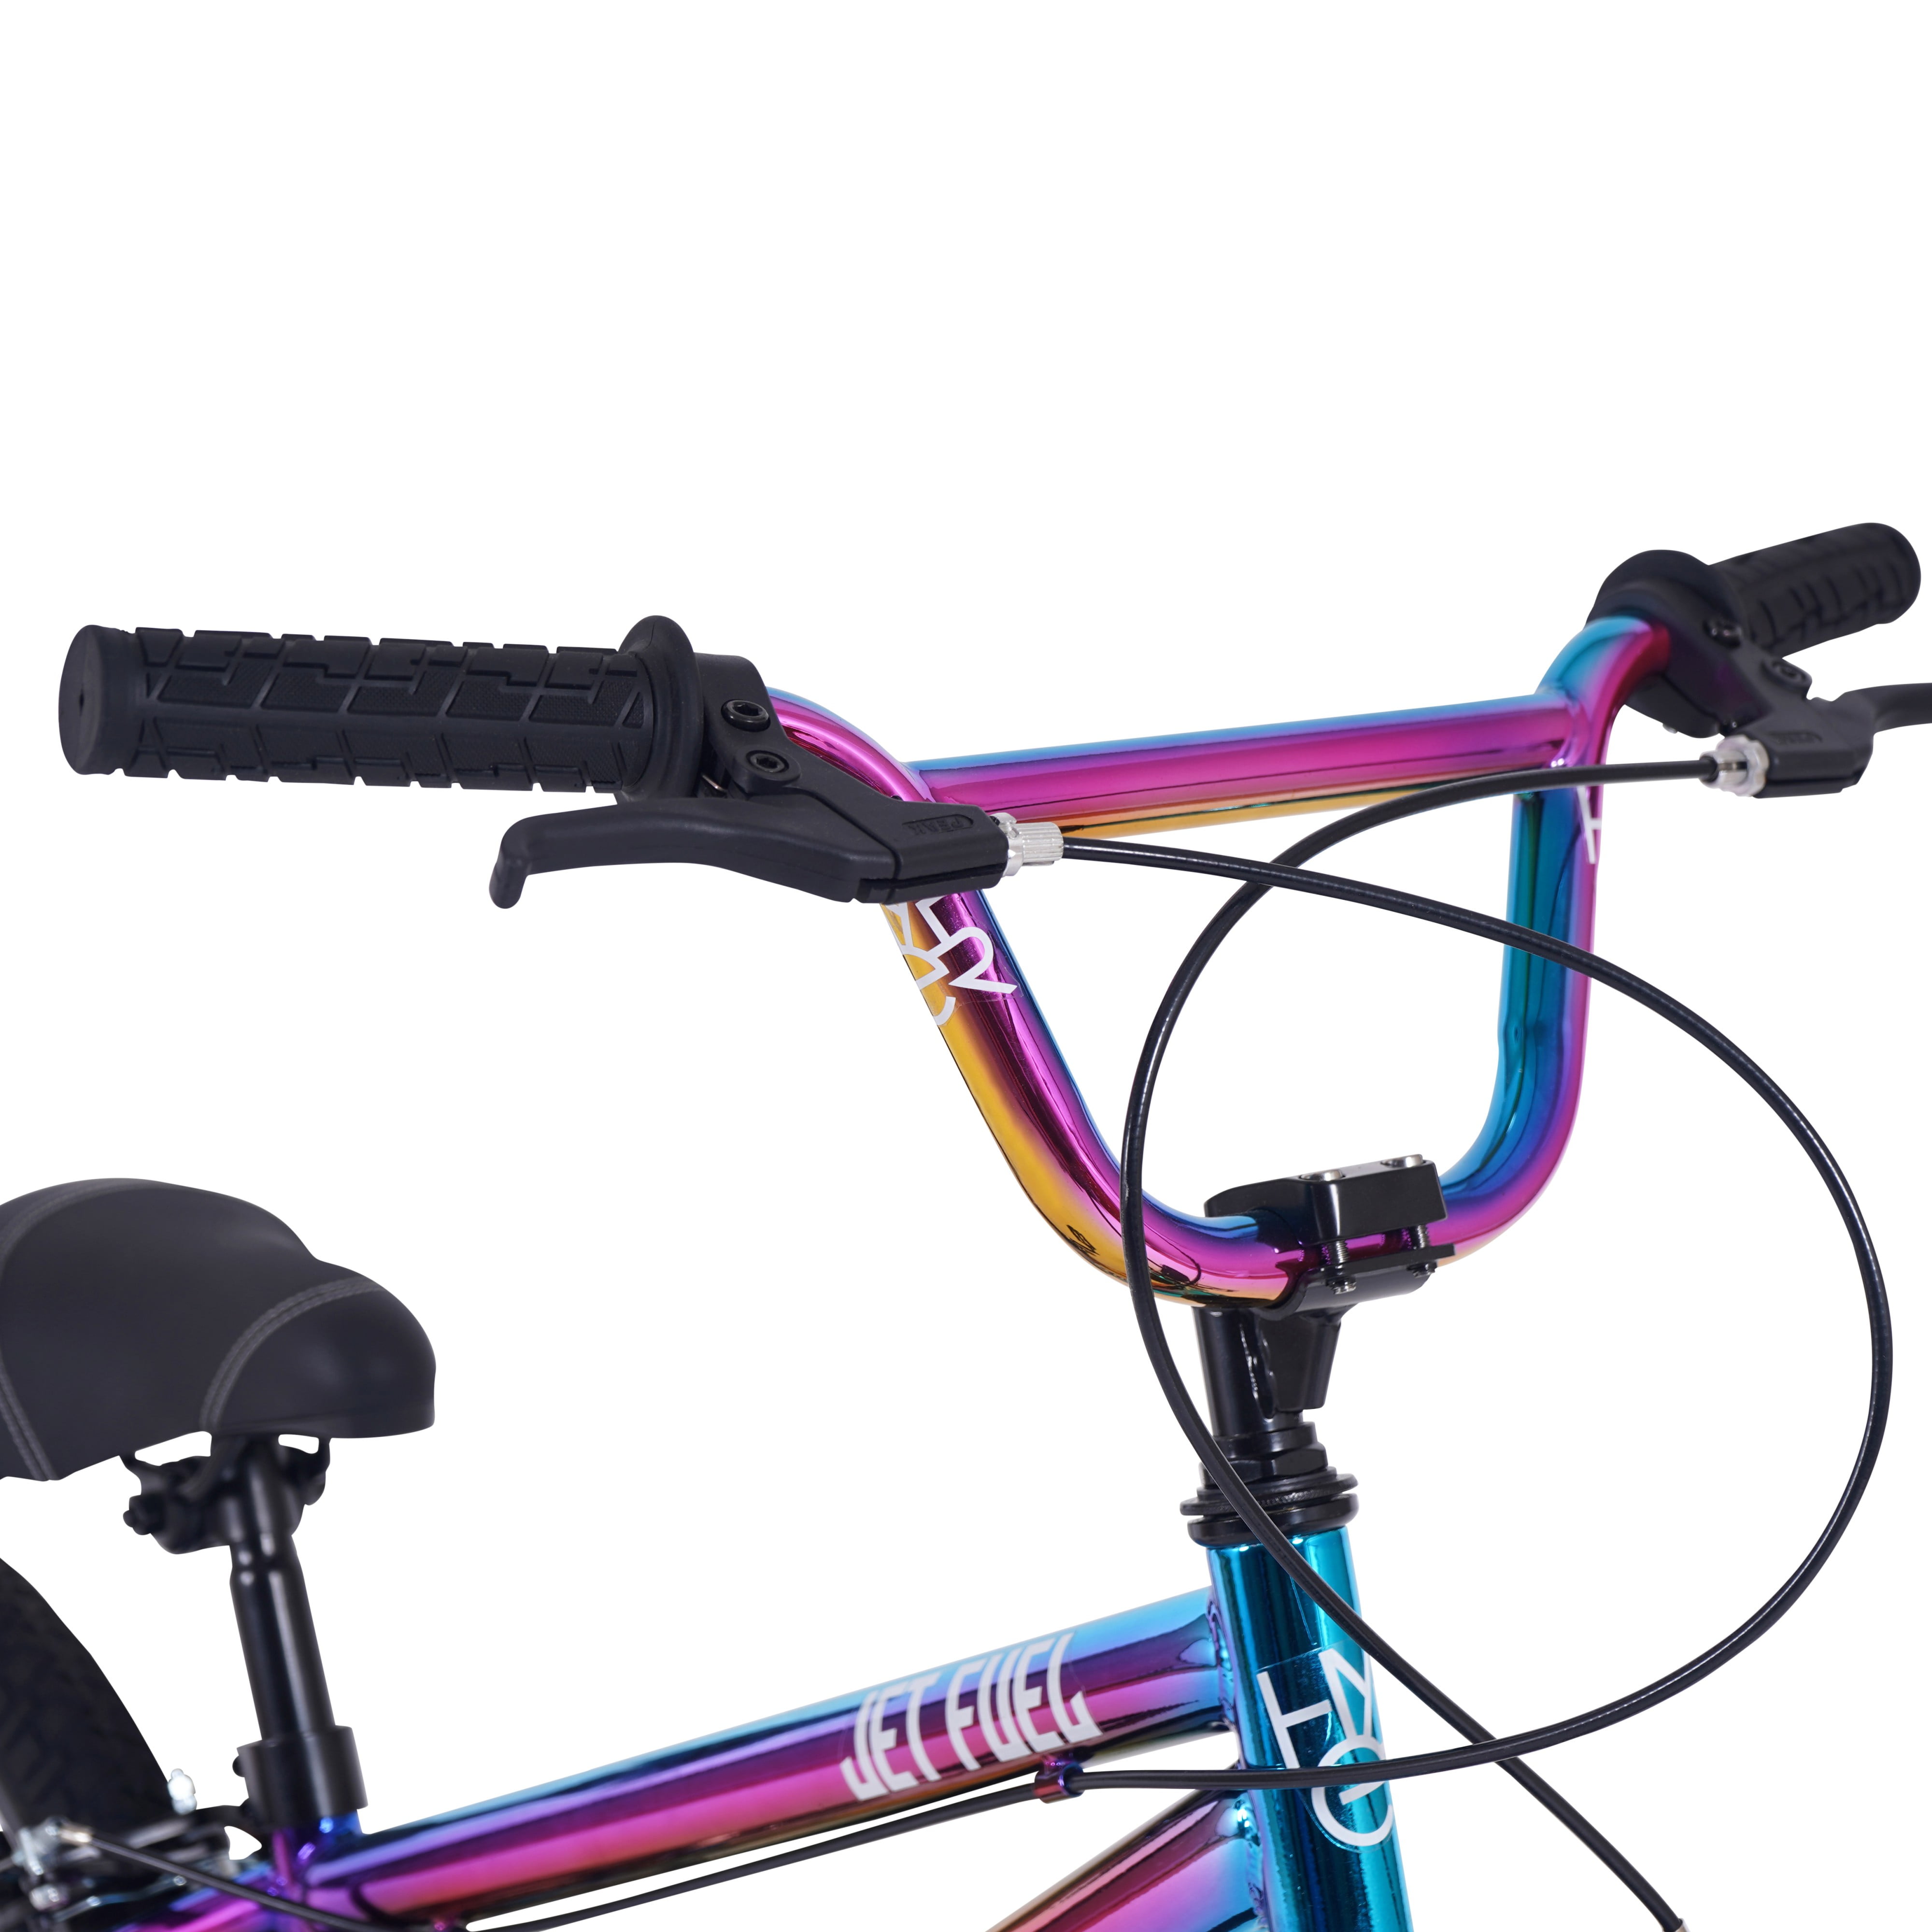 Hyper Bicycle 18 In. Unisex Multicolor Jet Fuel BMX Bicycle